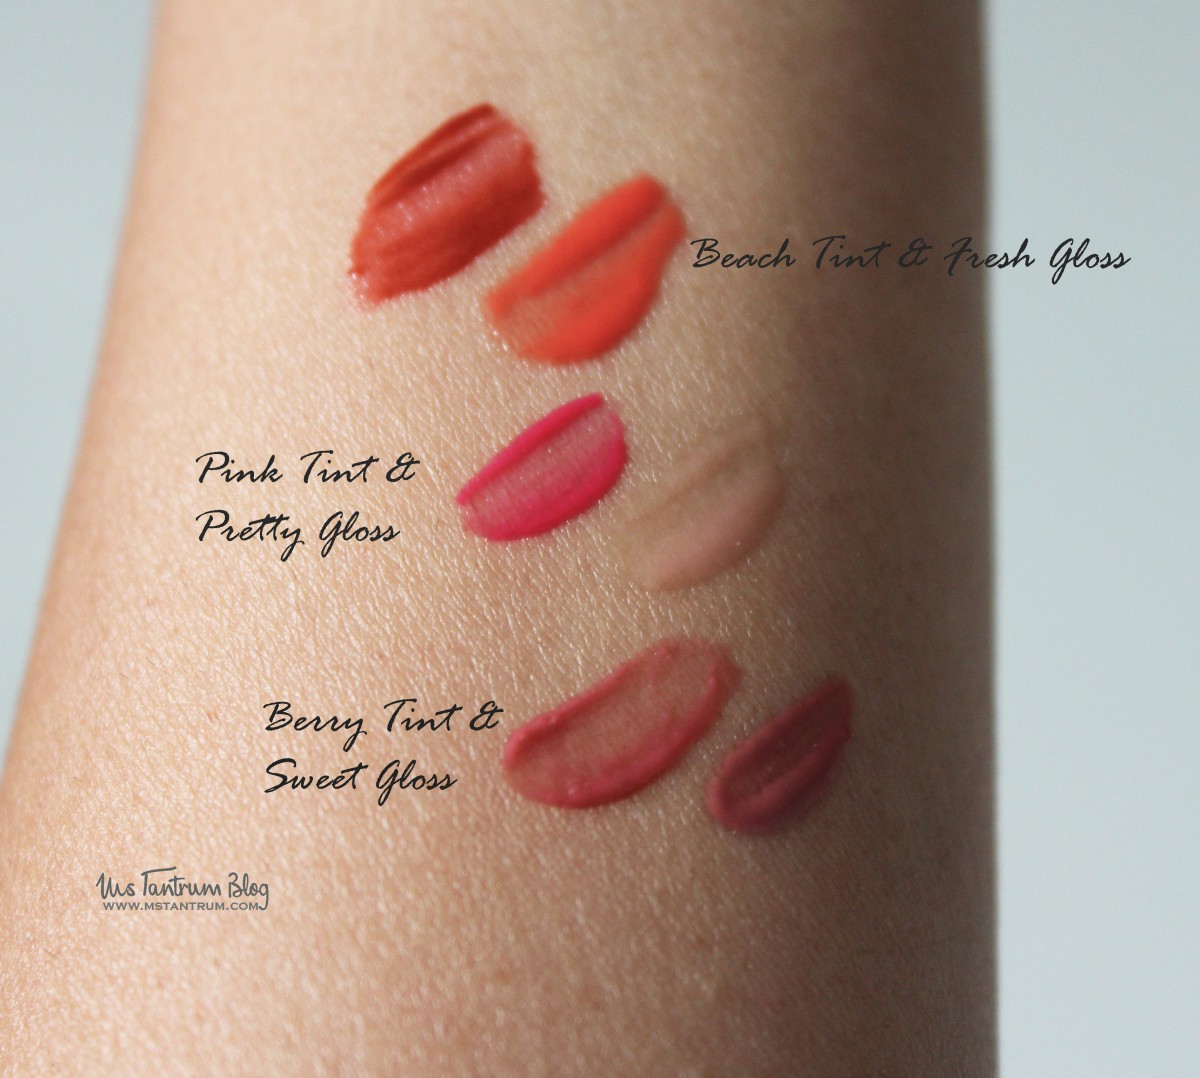 Pixi gel tints & sheer glosses swatches